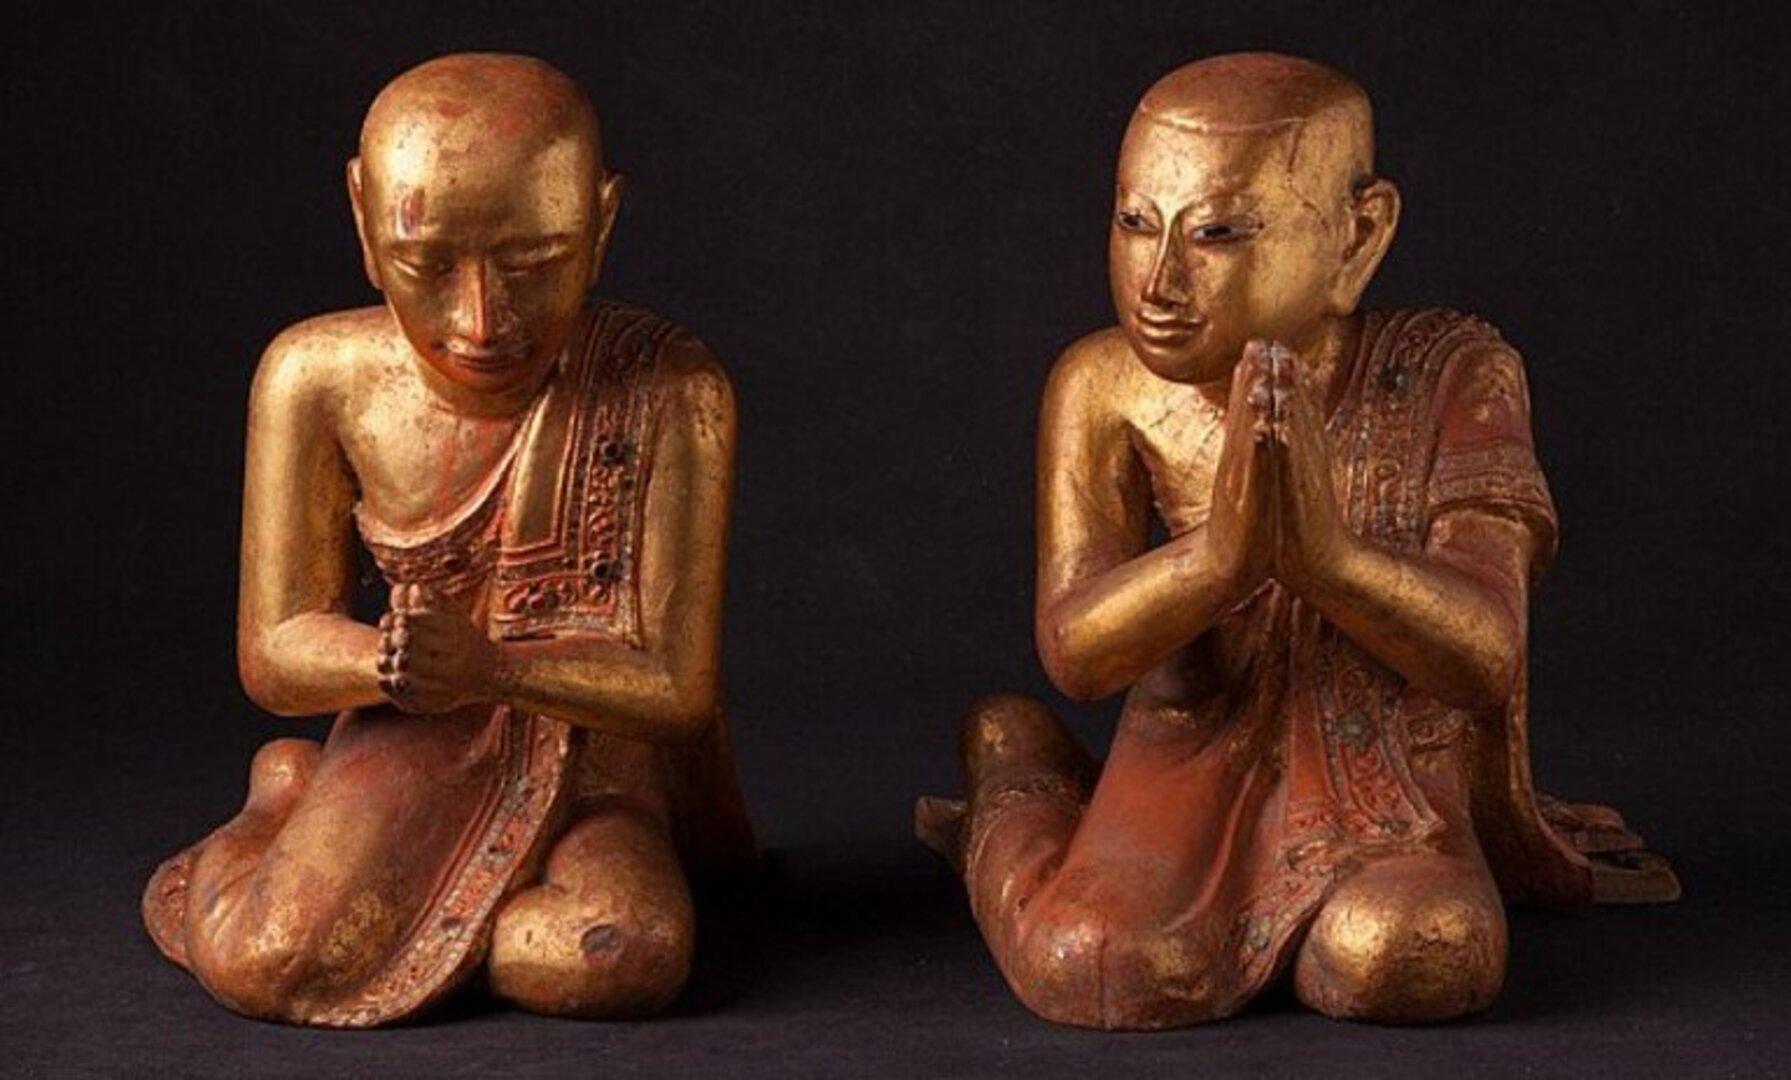 Material: wood
Measures: 30 cm high 
21 & 26 cm wide and 31,5 cm deep
Weight: 4.75 kgs
Goldplated with 24 krt. gold
Mandalay style
Namaskara mudra
Originating from Burma
19th century
A very beautiful pair !
 